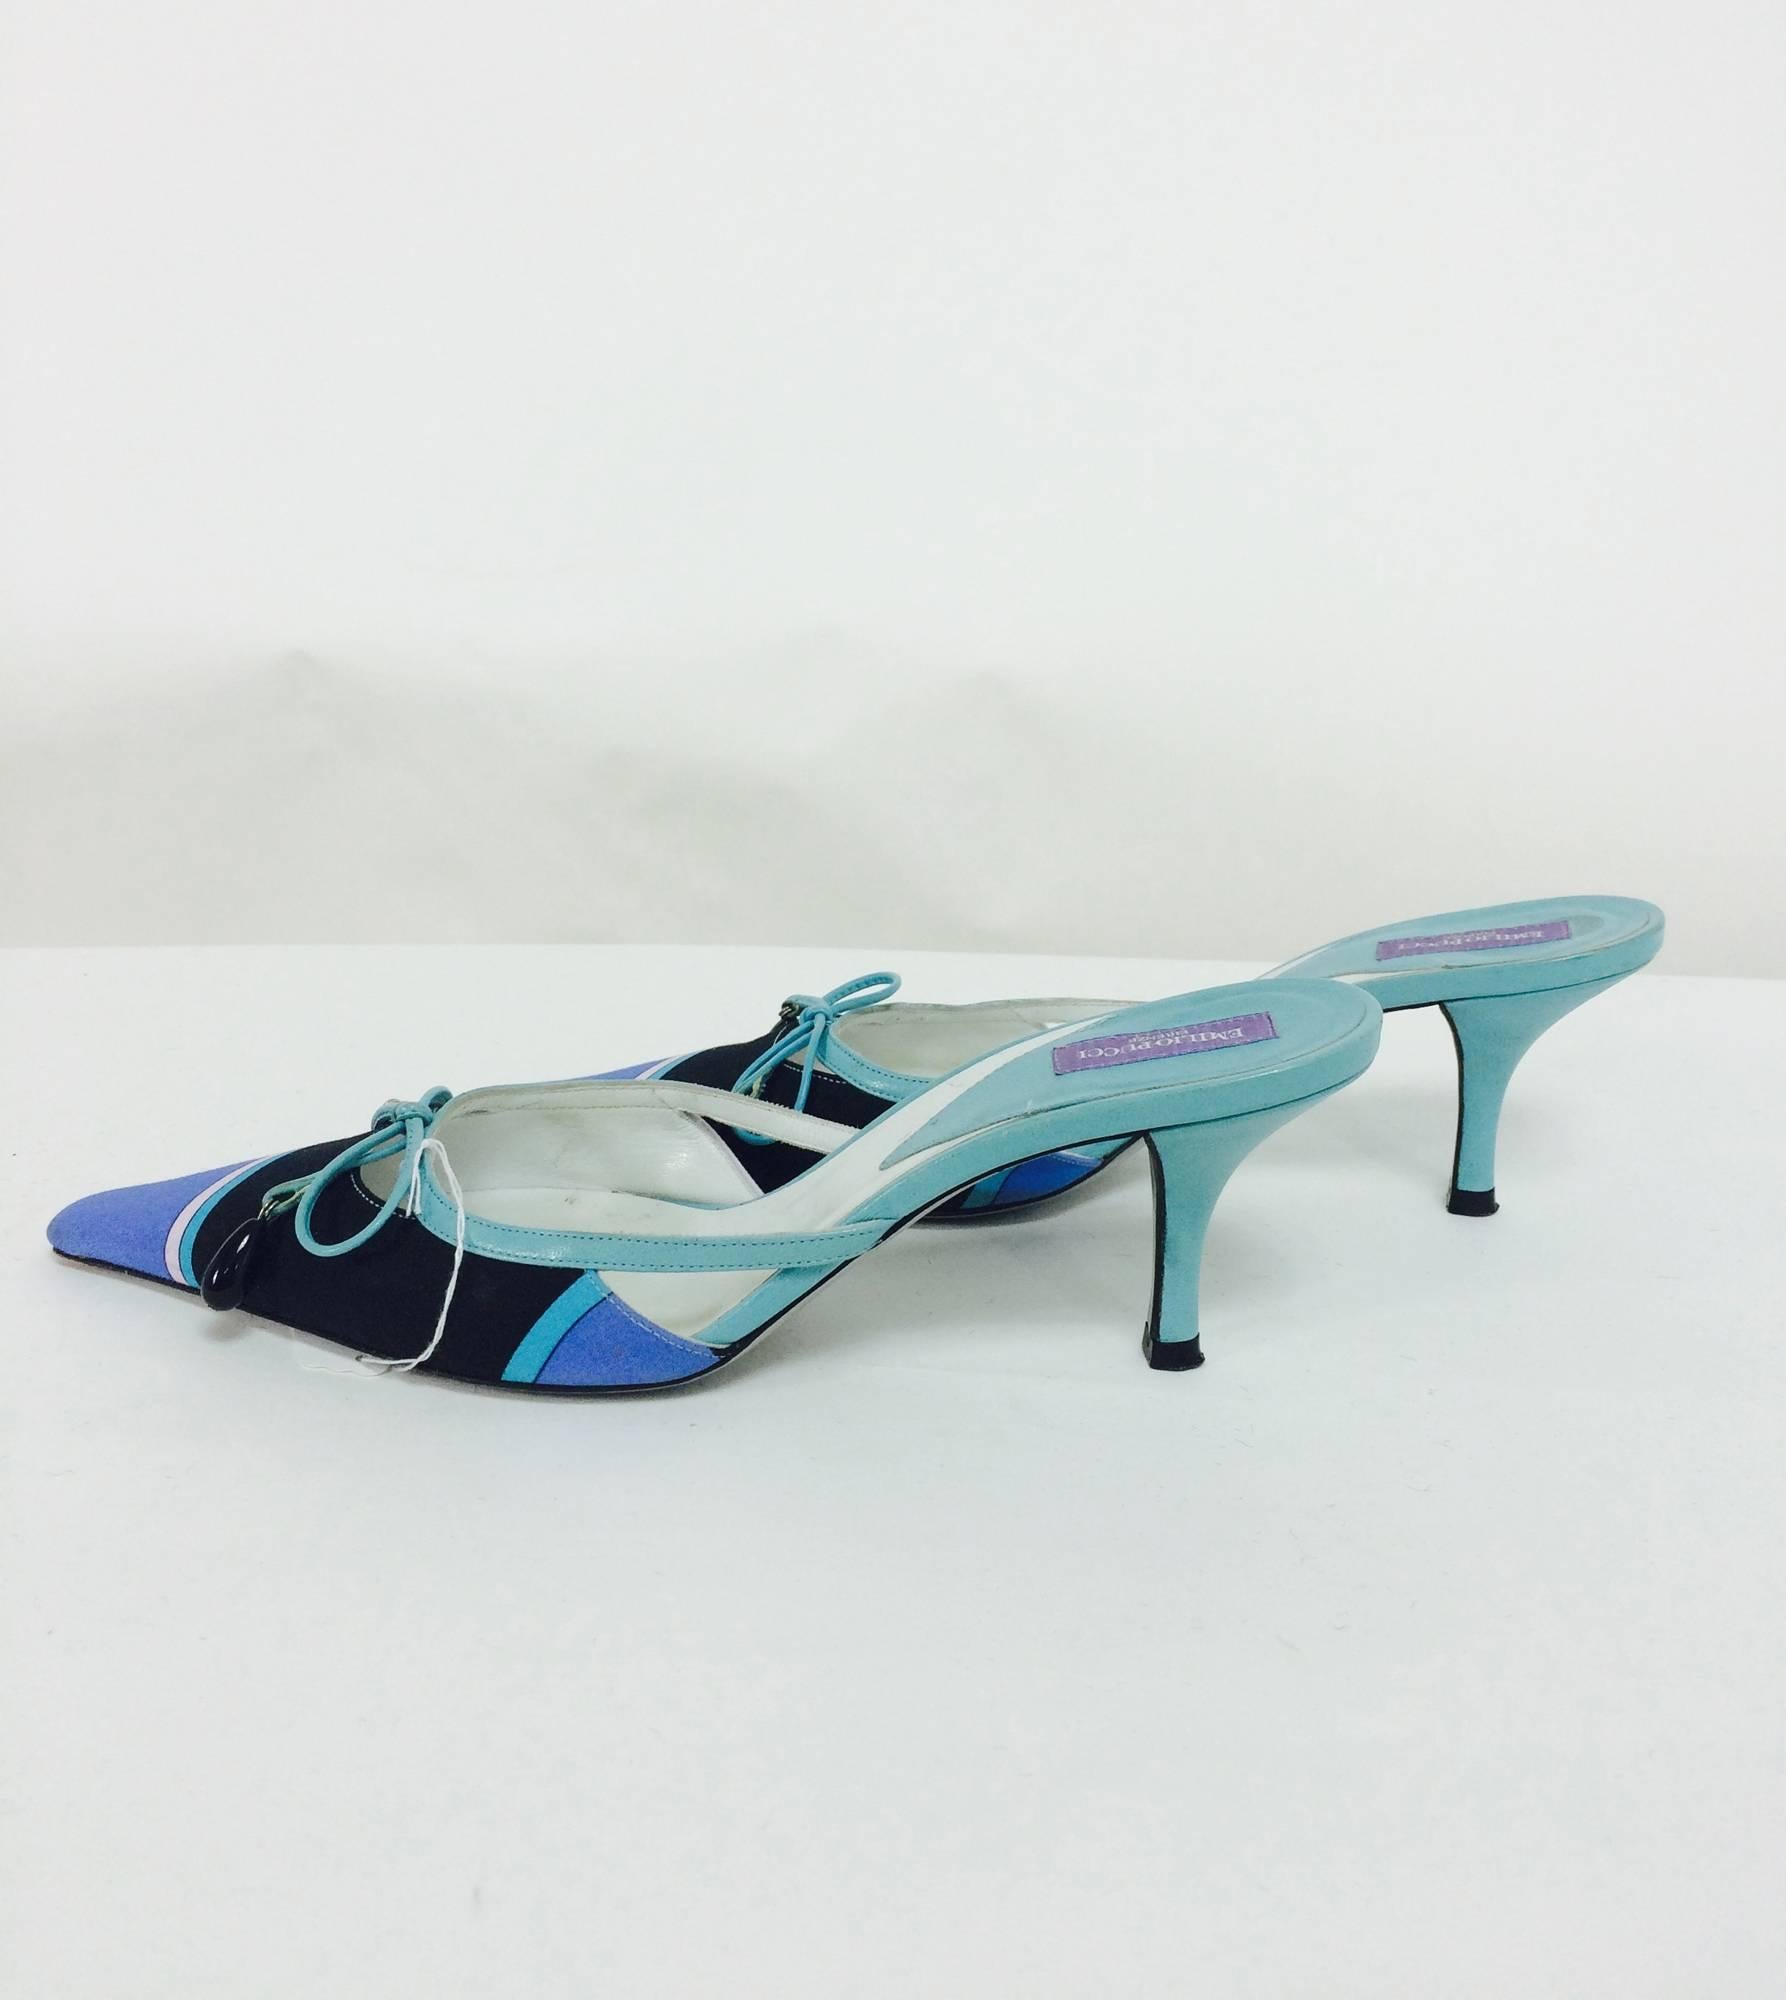 Pucci blue and aqua silk print bow and bead front high heel mules 36 1/ ...